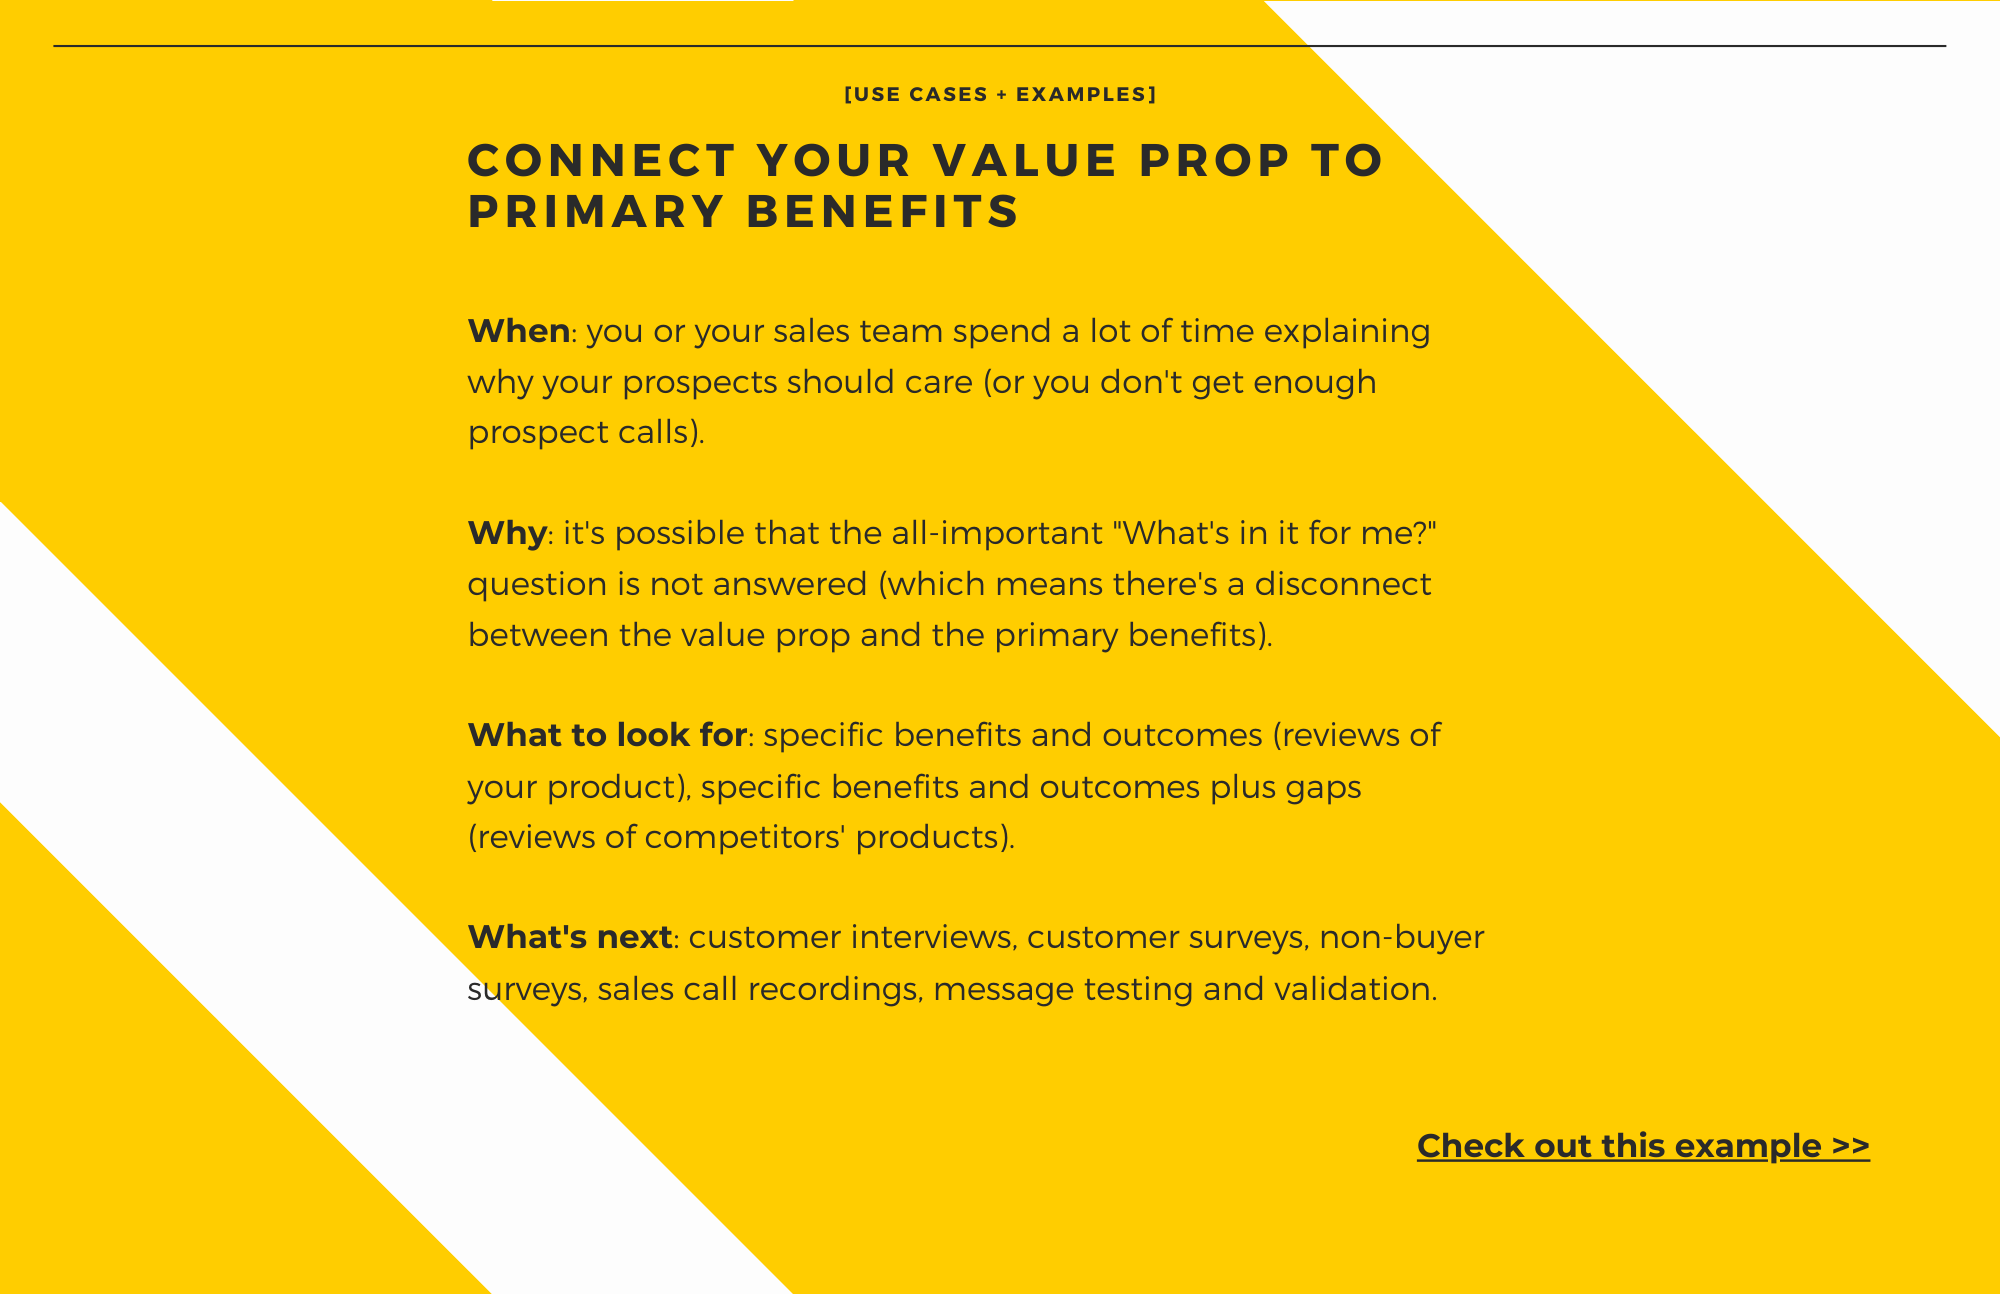 Connect your value prop to primary benefits